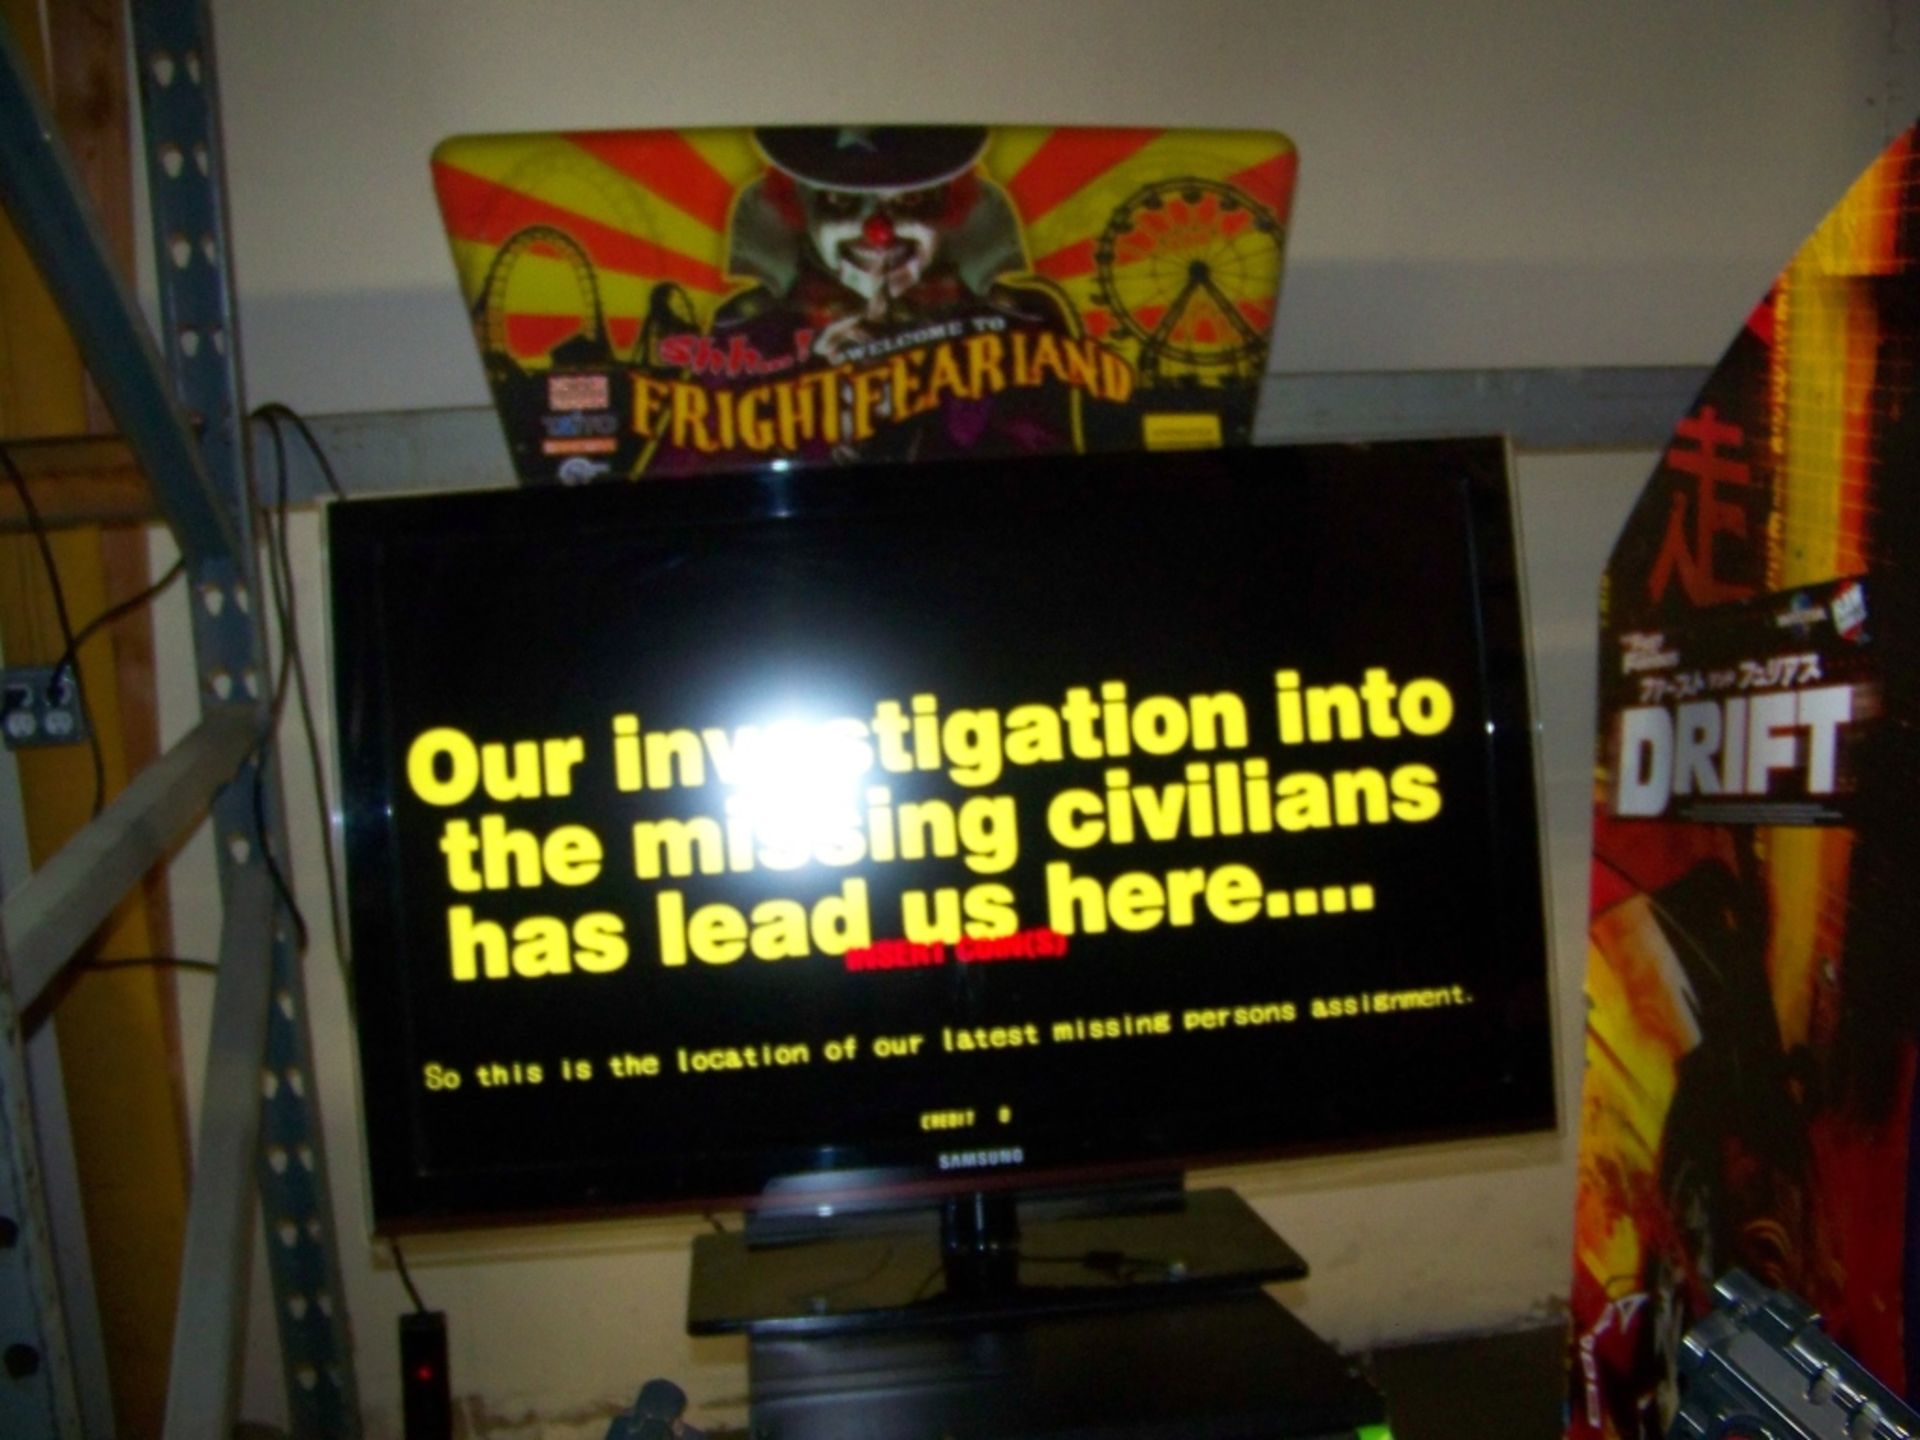 FRIGHT FEARLAND FIXED GUN SHOOTER ARCADE GAME - Image 4 of 6